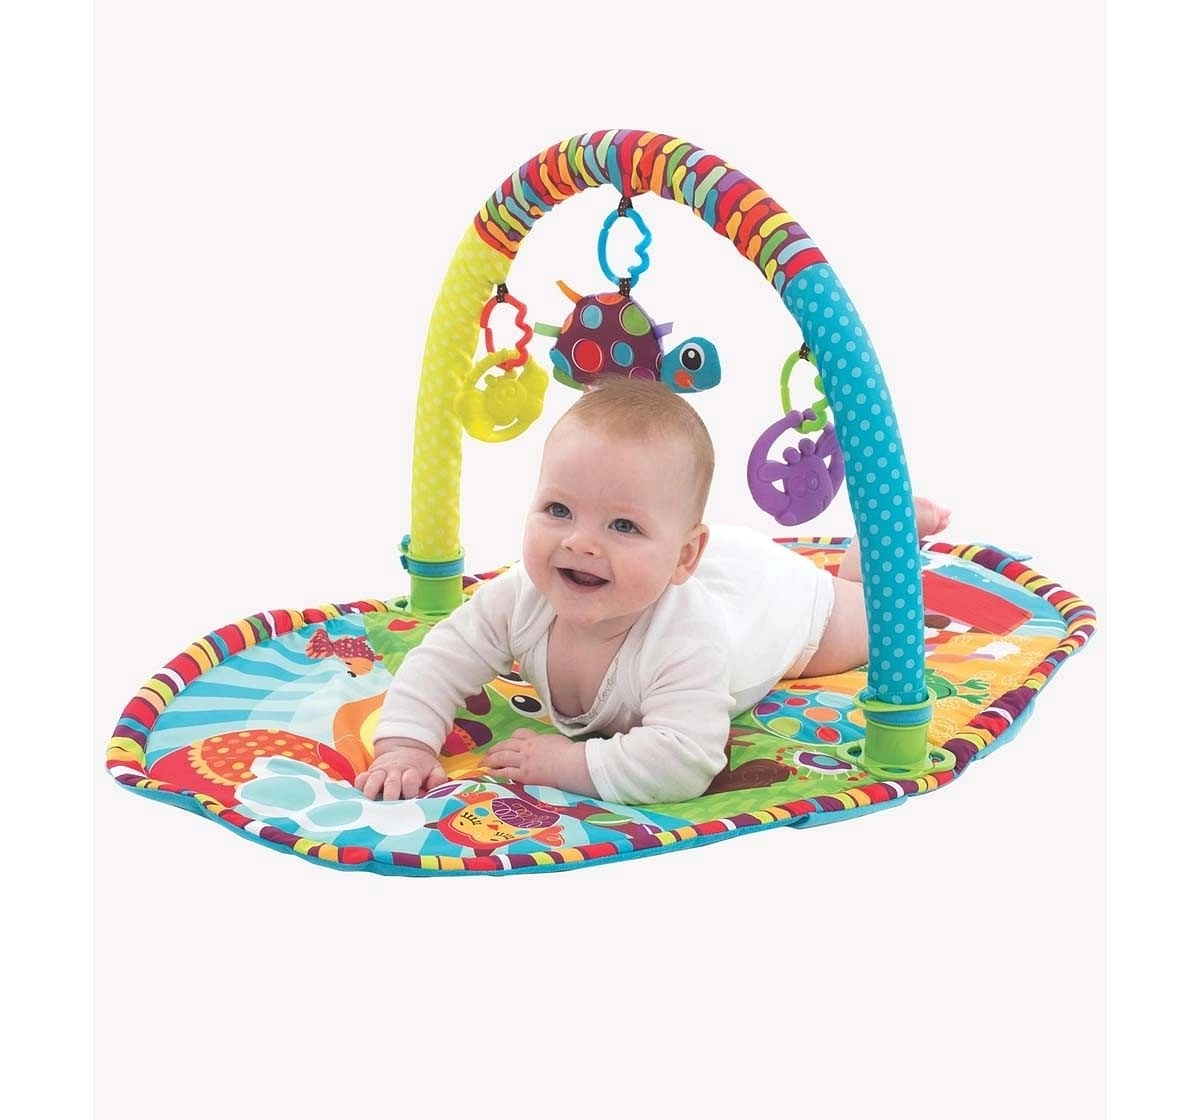 Playgro Play In The Park Activity Gym Blue Baby Gear for Kids age 0M+ 